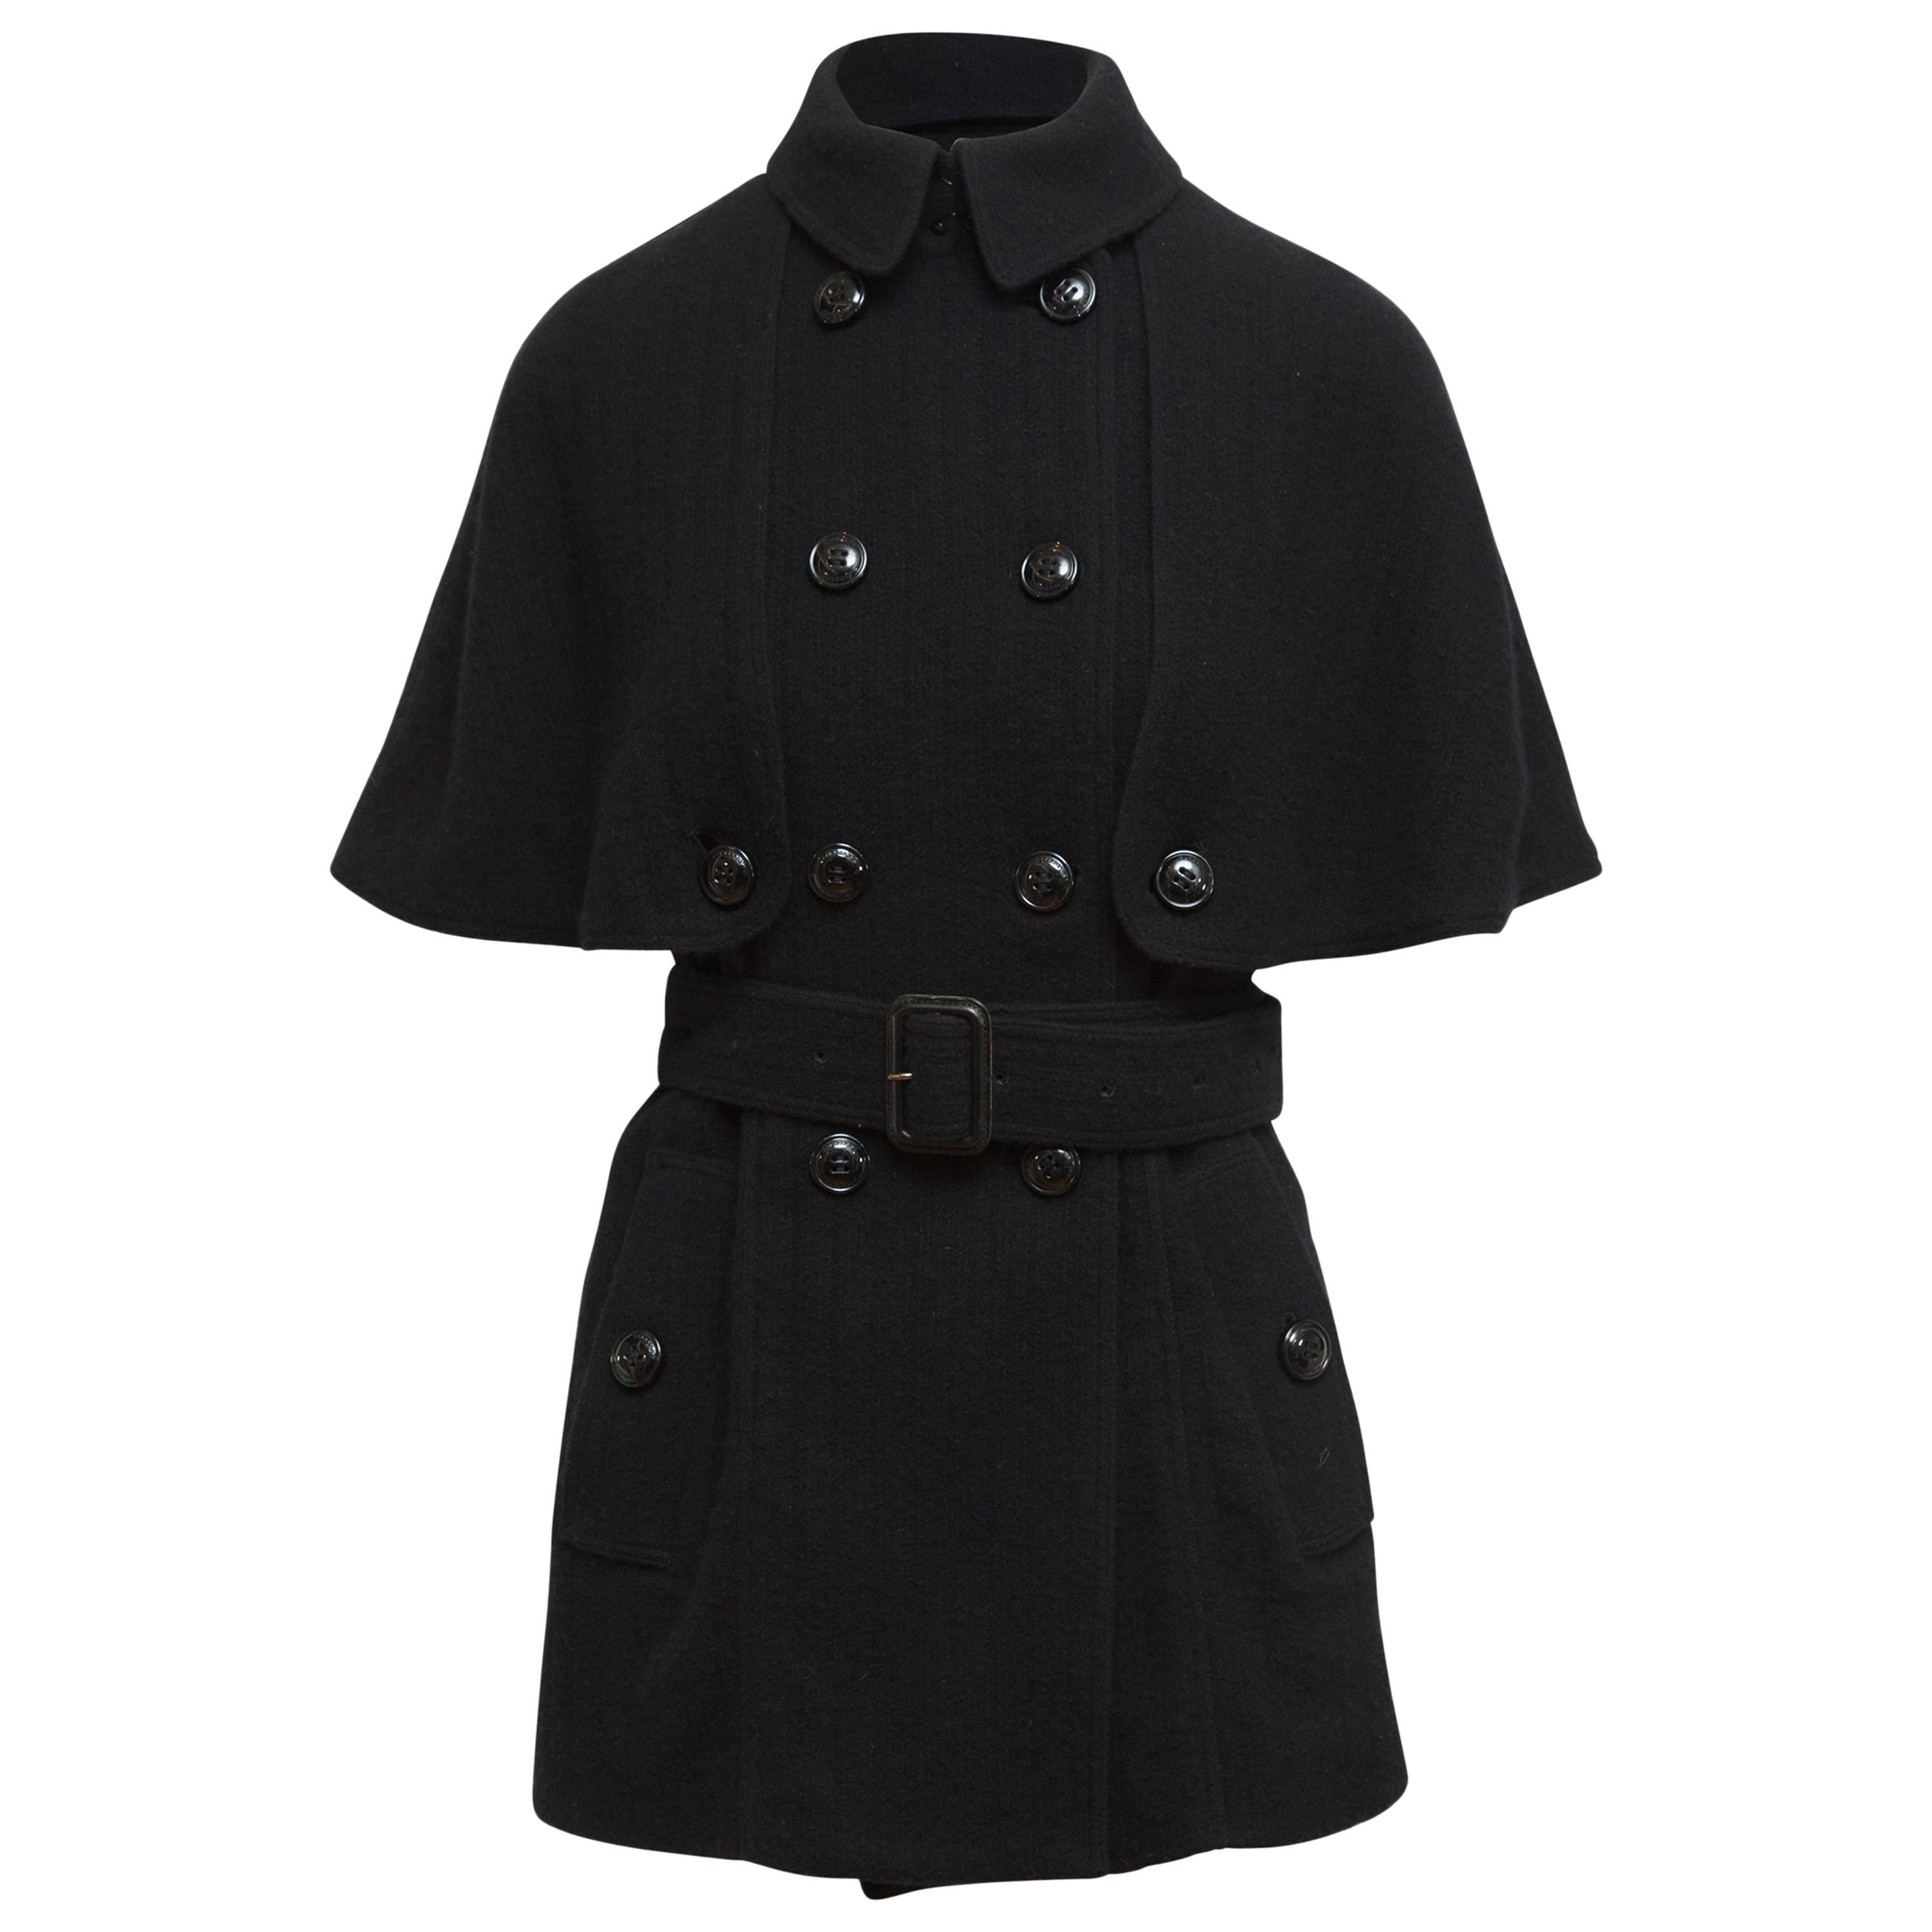 Burberry London Black Double-Breasted Cape with Coat